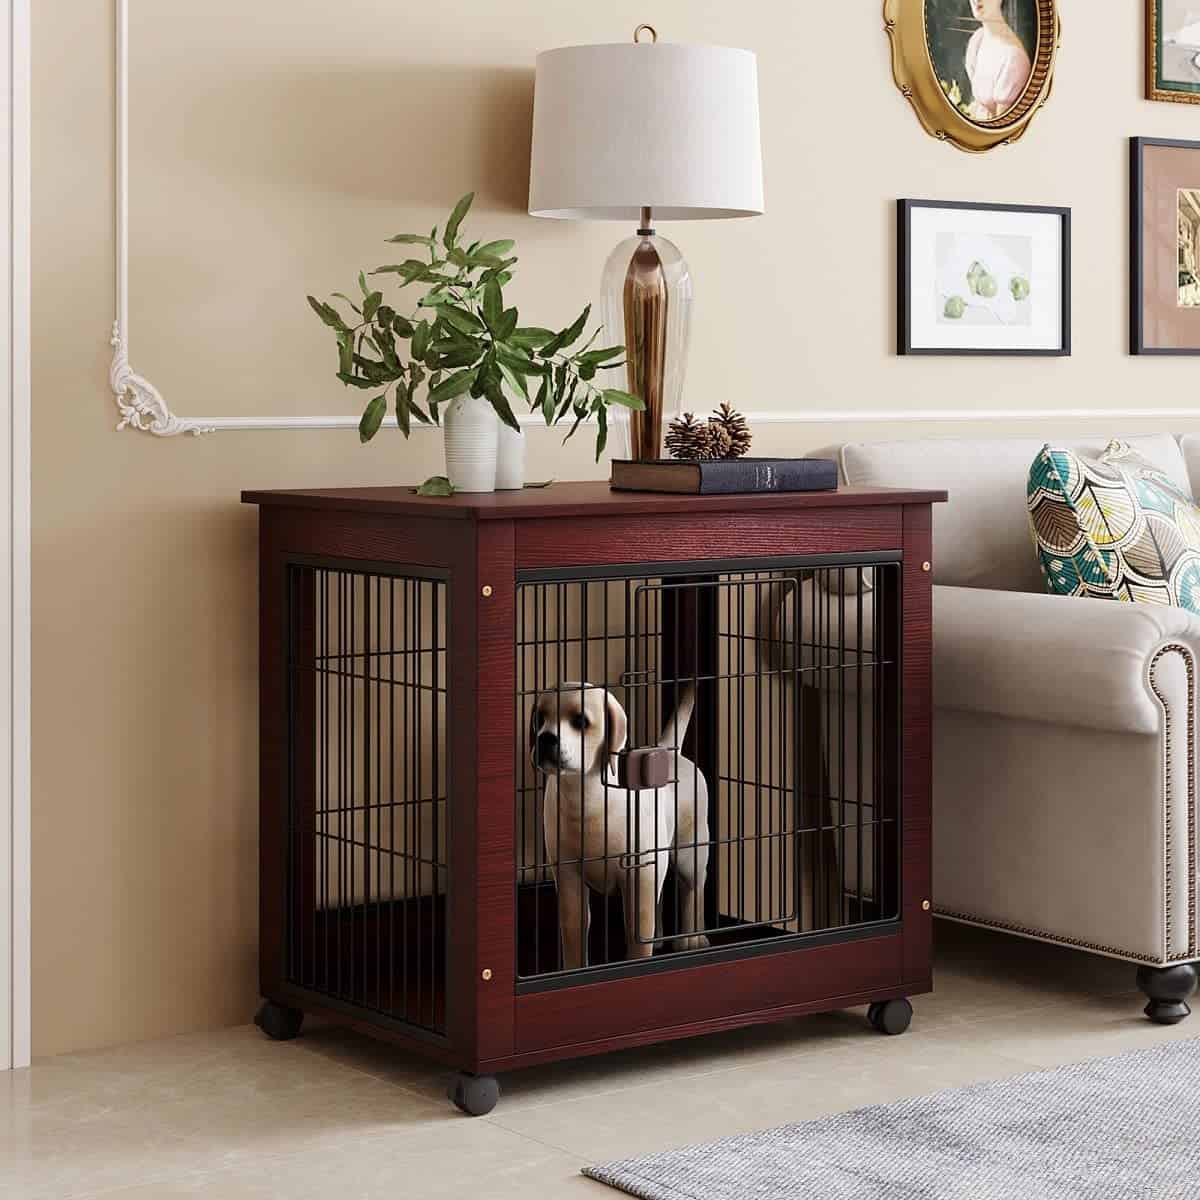 a dog inside the ZSQ Furniture Style Dog Crate